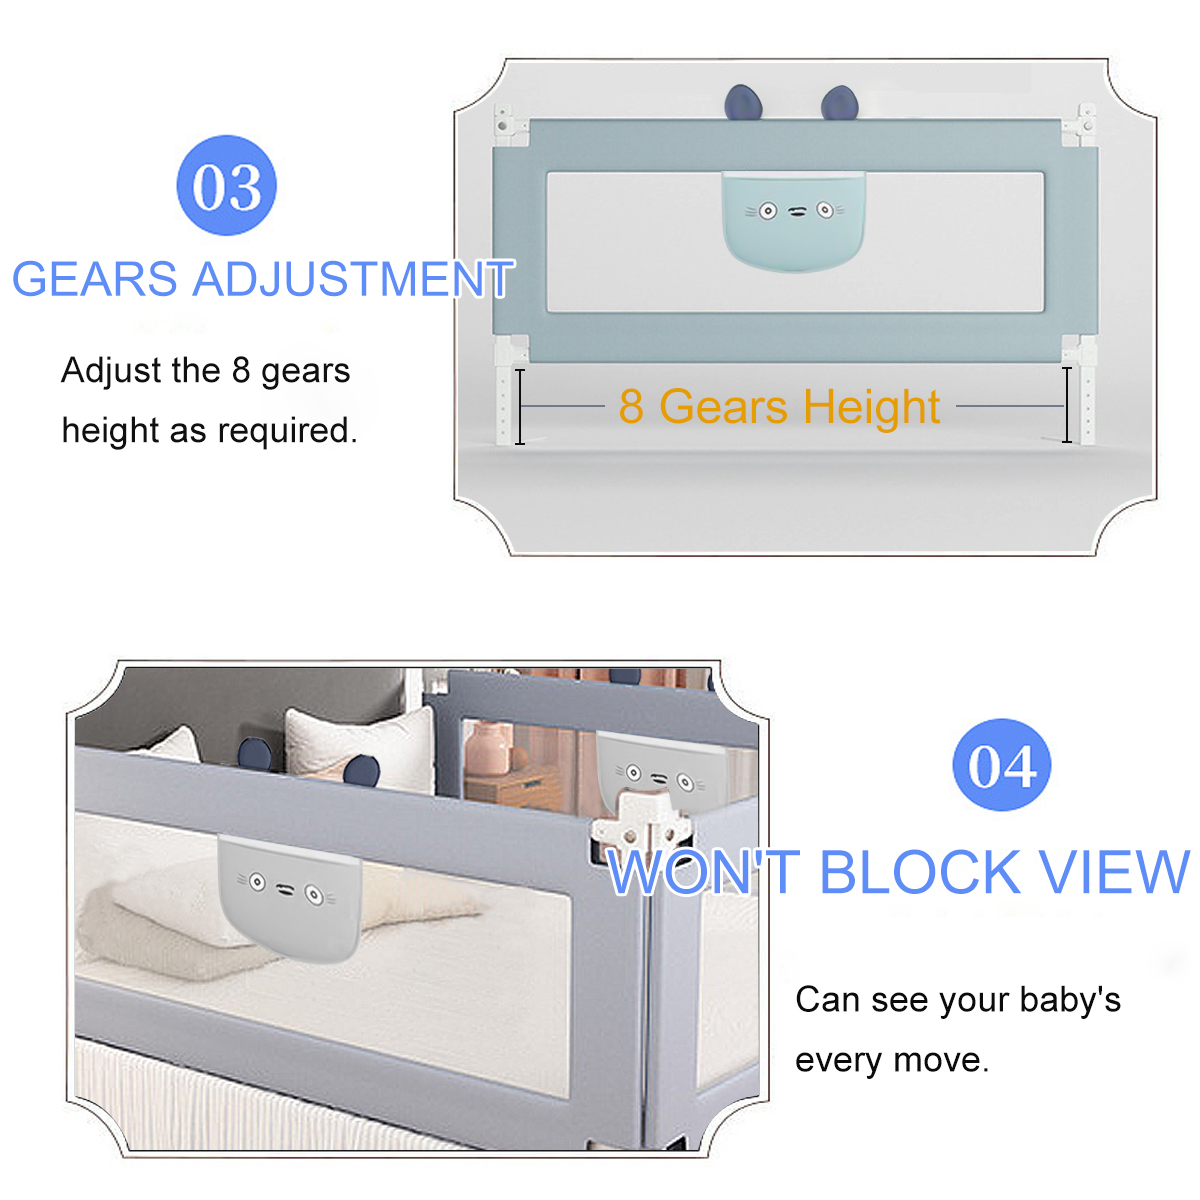 15m18m20m-Adjustable-Folding-Kids-Safety-Bed-RailBedRail-Cot-Guard-Protecte-Child-Toddler-1918099-5